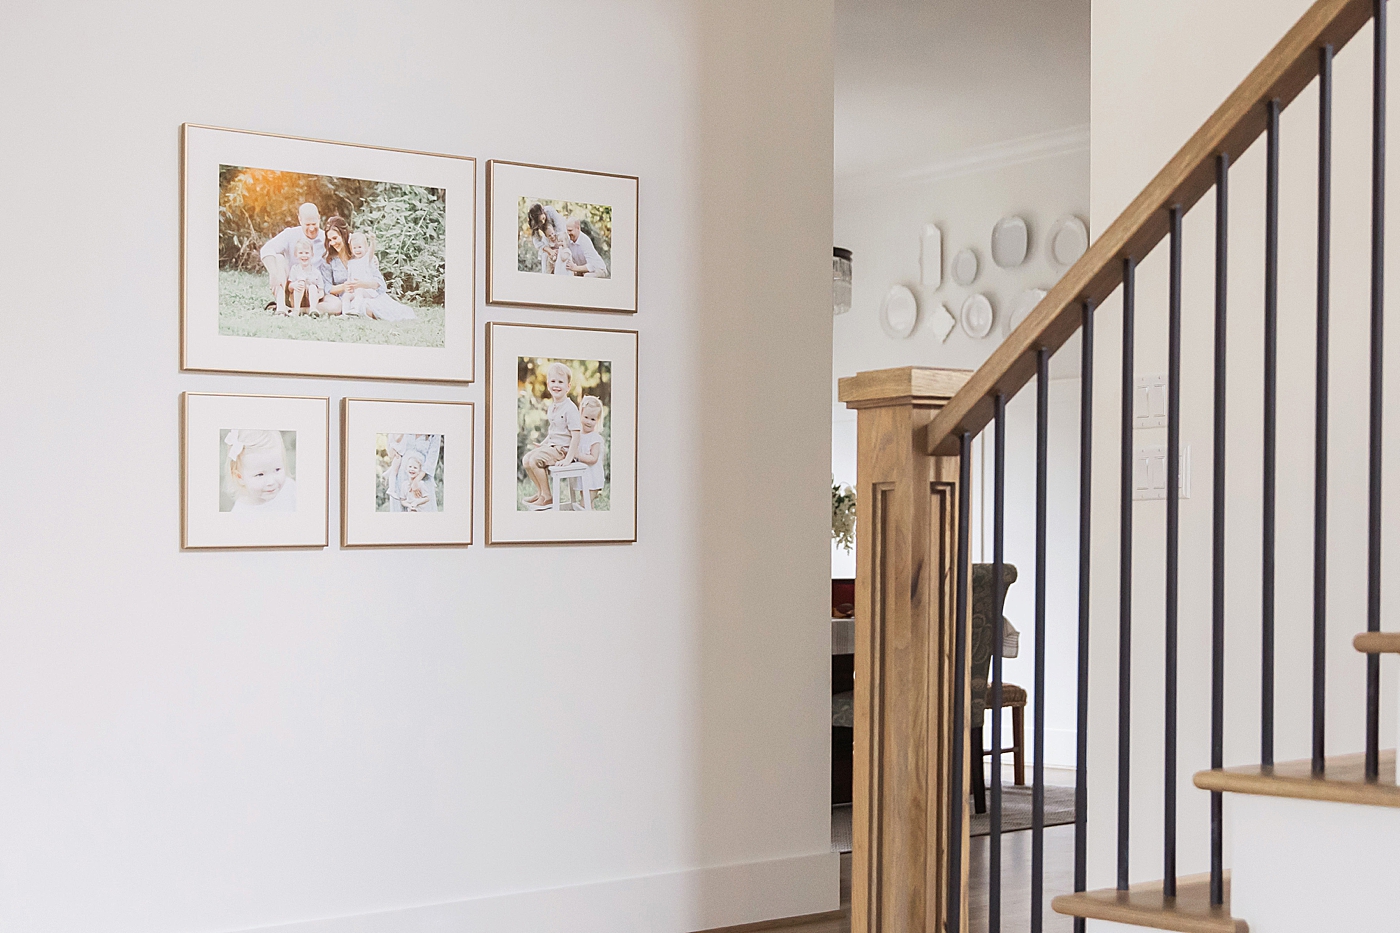 Custom gallery wall and framing in Houston home. Photo by Fresh Light Photography.